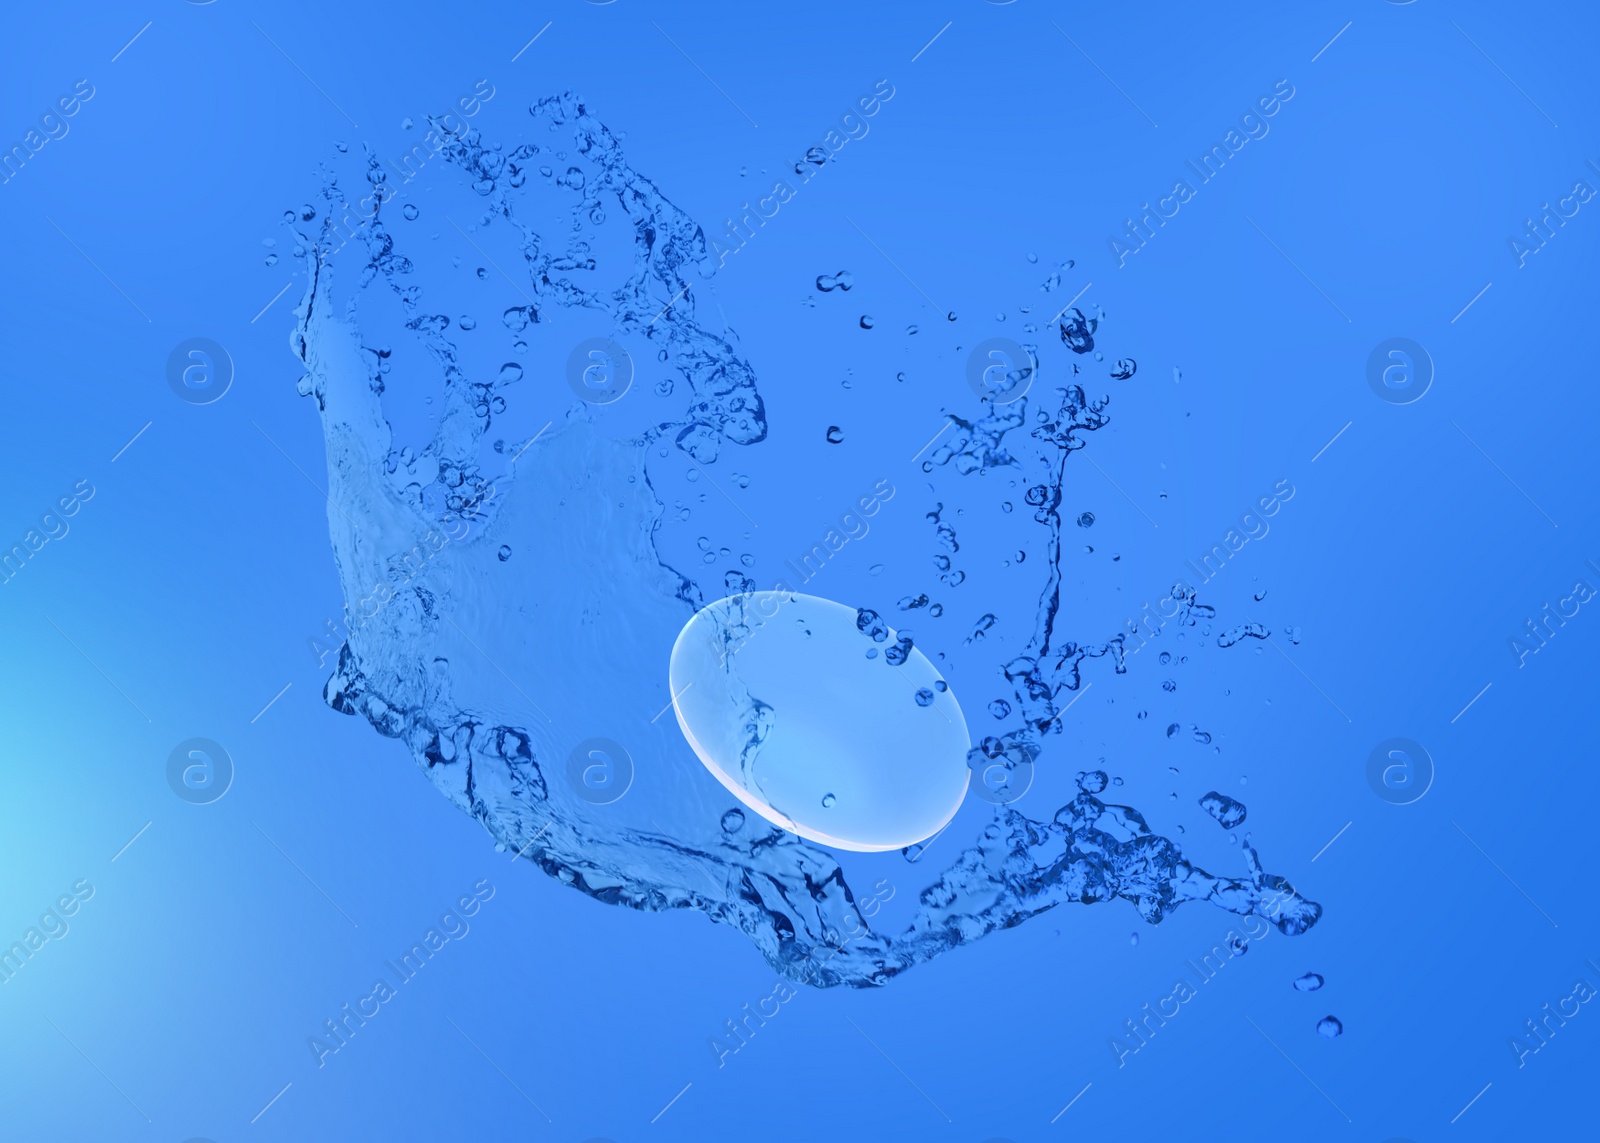 Image of Contact lens and splash of solution on blue background